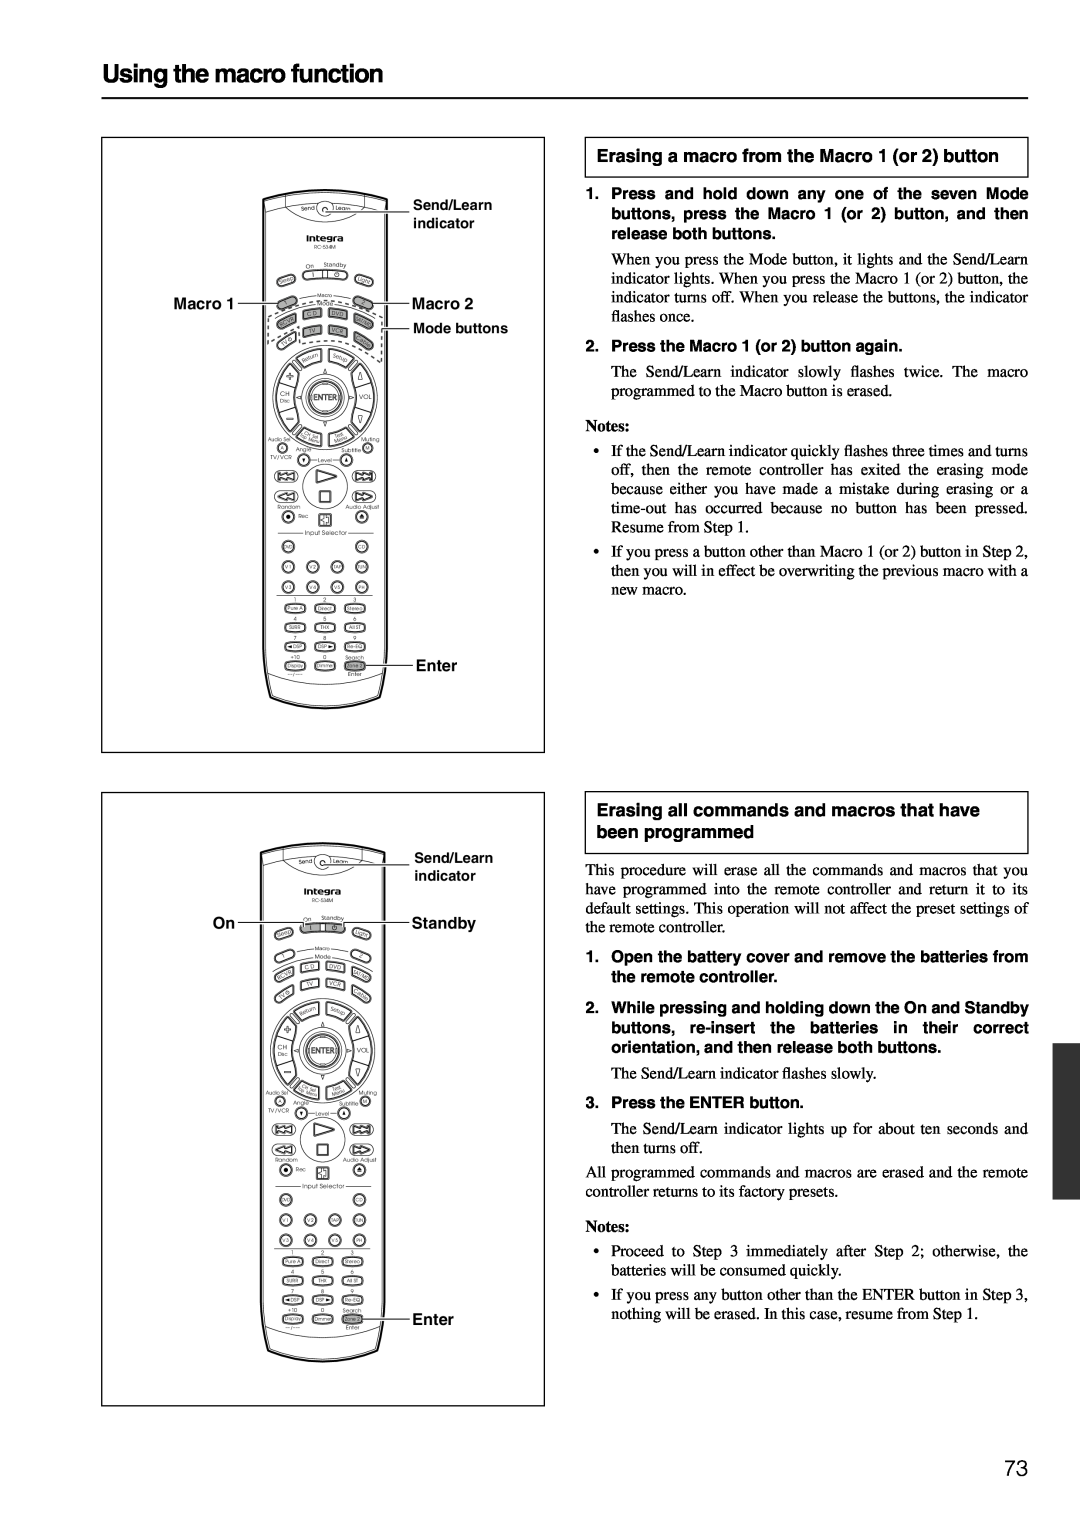 Integra DTR-6.4/5.4 instruction manual Using the macro function, Erasing a macro from the Macro 1 or 2 button, Notes 